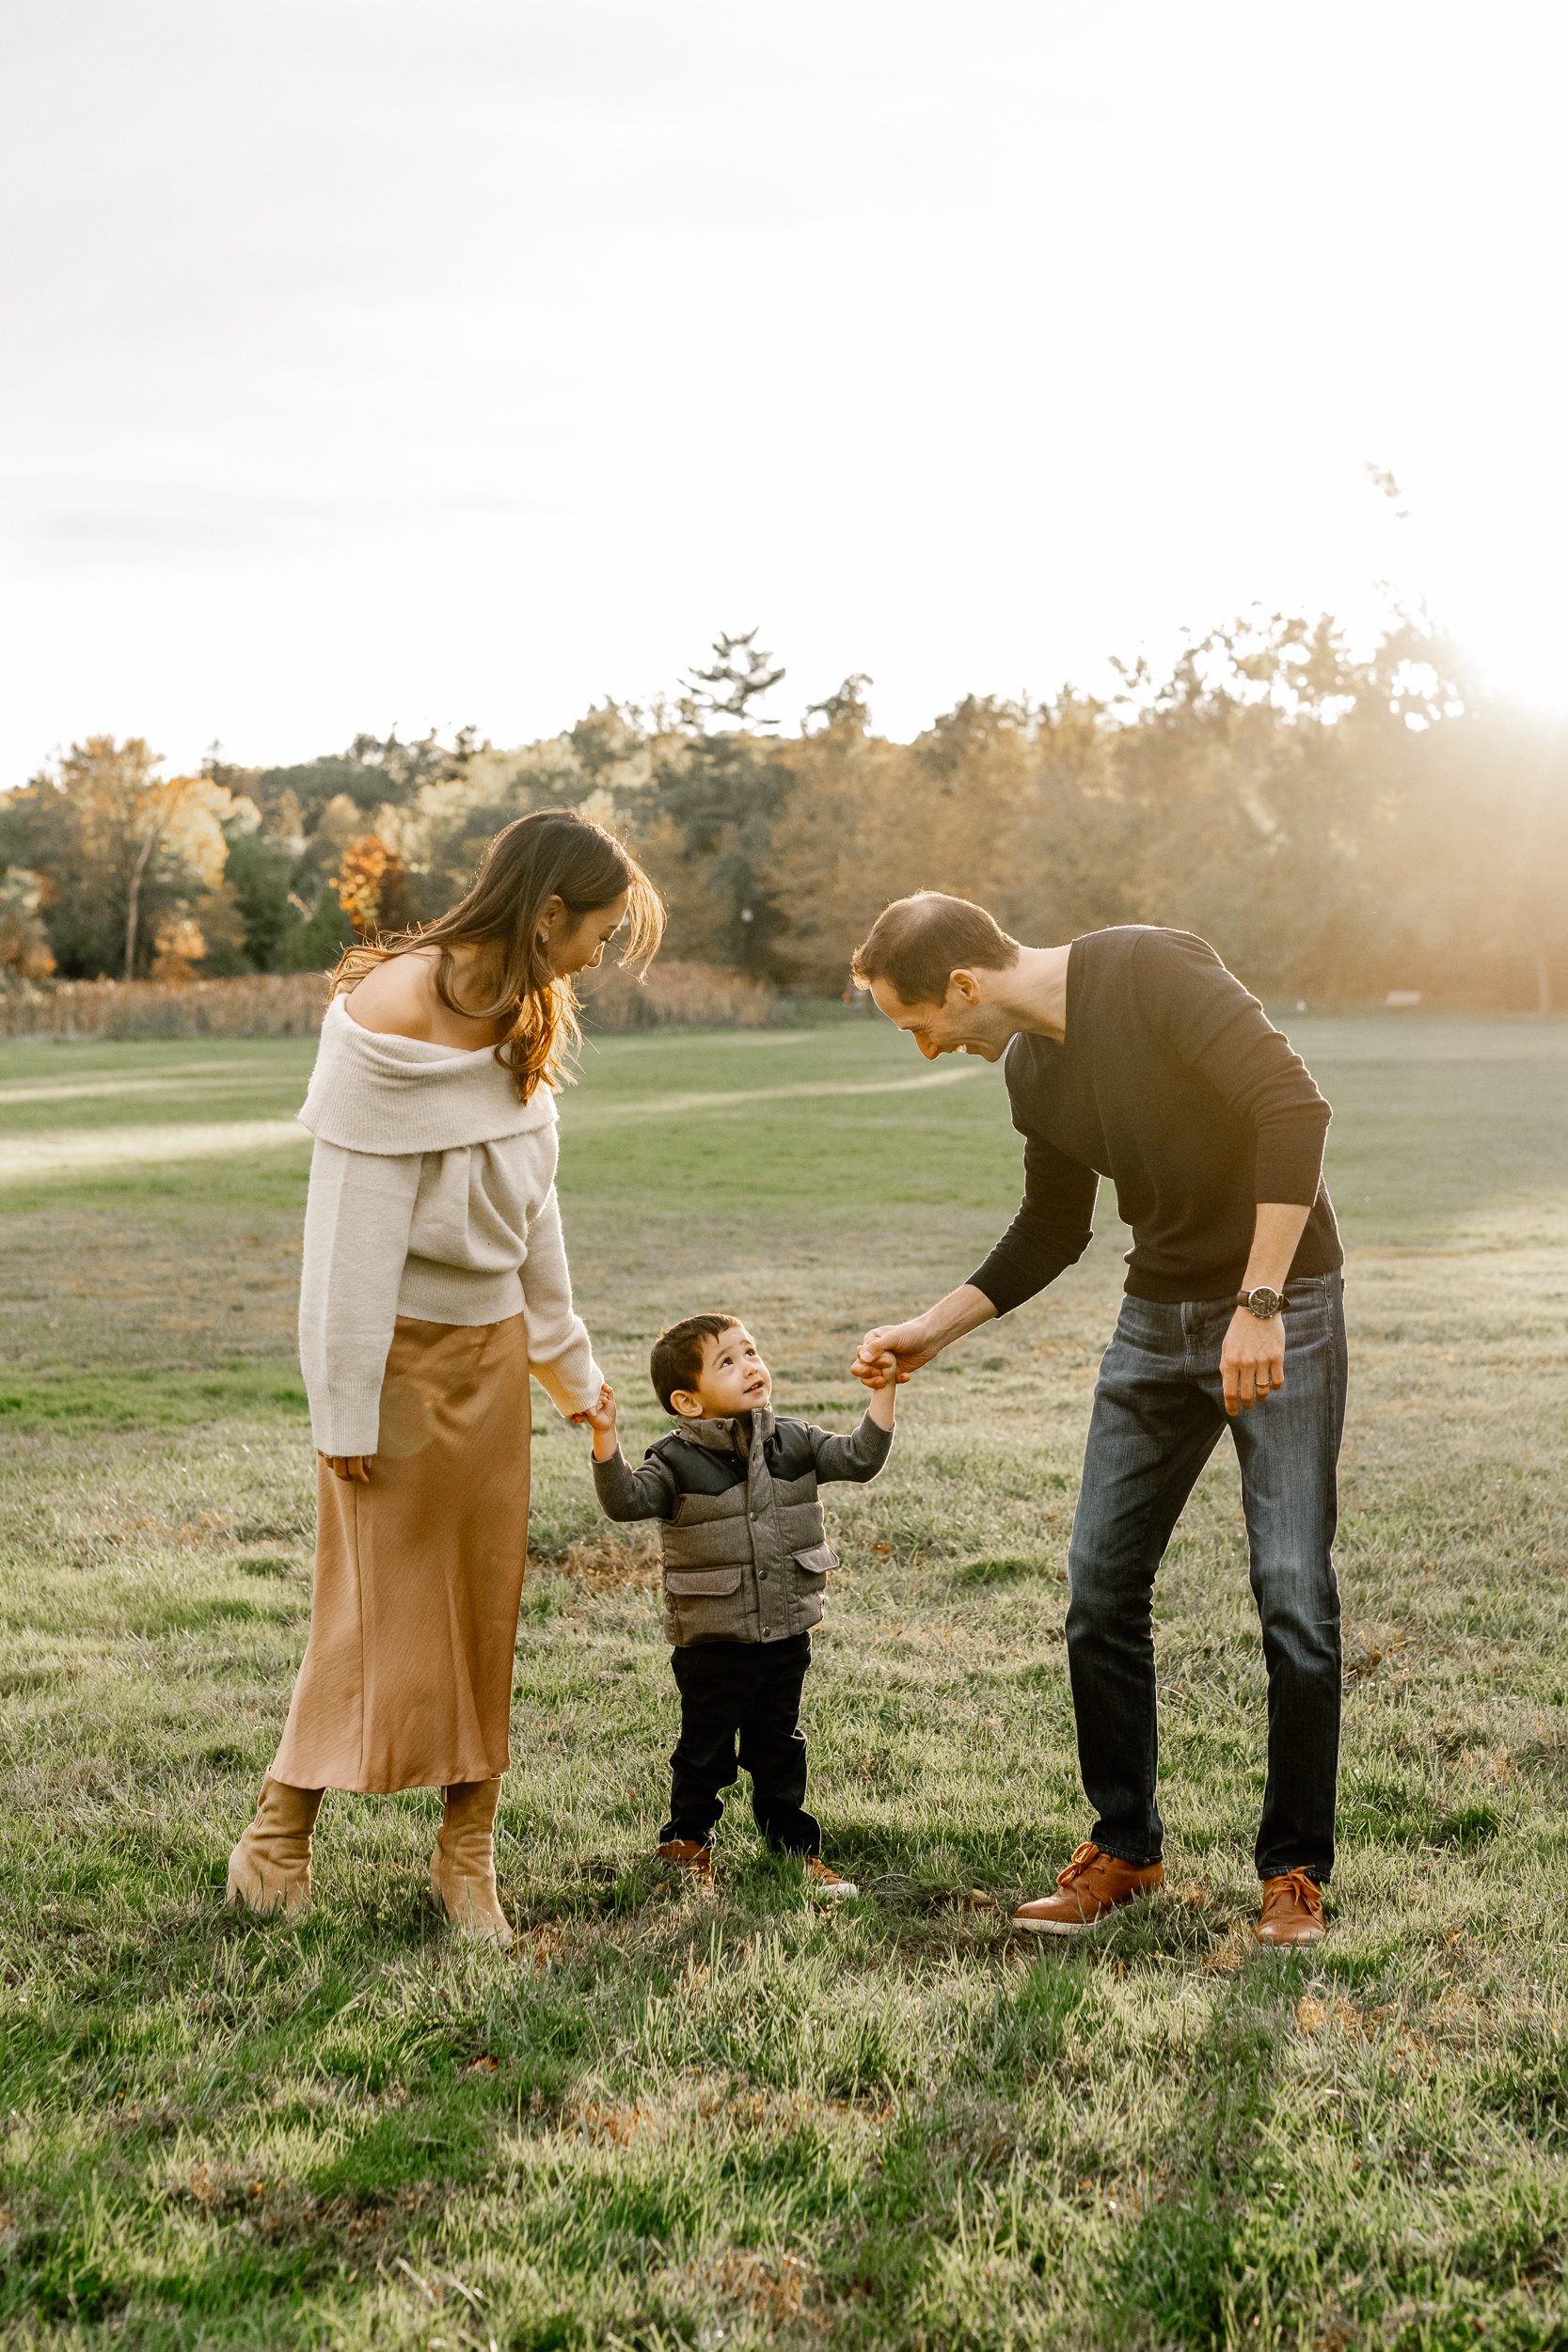  In New Jersey, a mother and father grab onto their son's hands and walk with him next to the fall foliage by Nicole Hawkins Photography. NJ fall family photos parents with child one-child family pictures&nbsp; #nicolehawkinsphotography #nicolehawkin